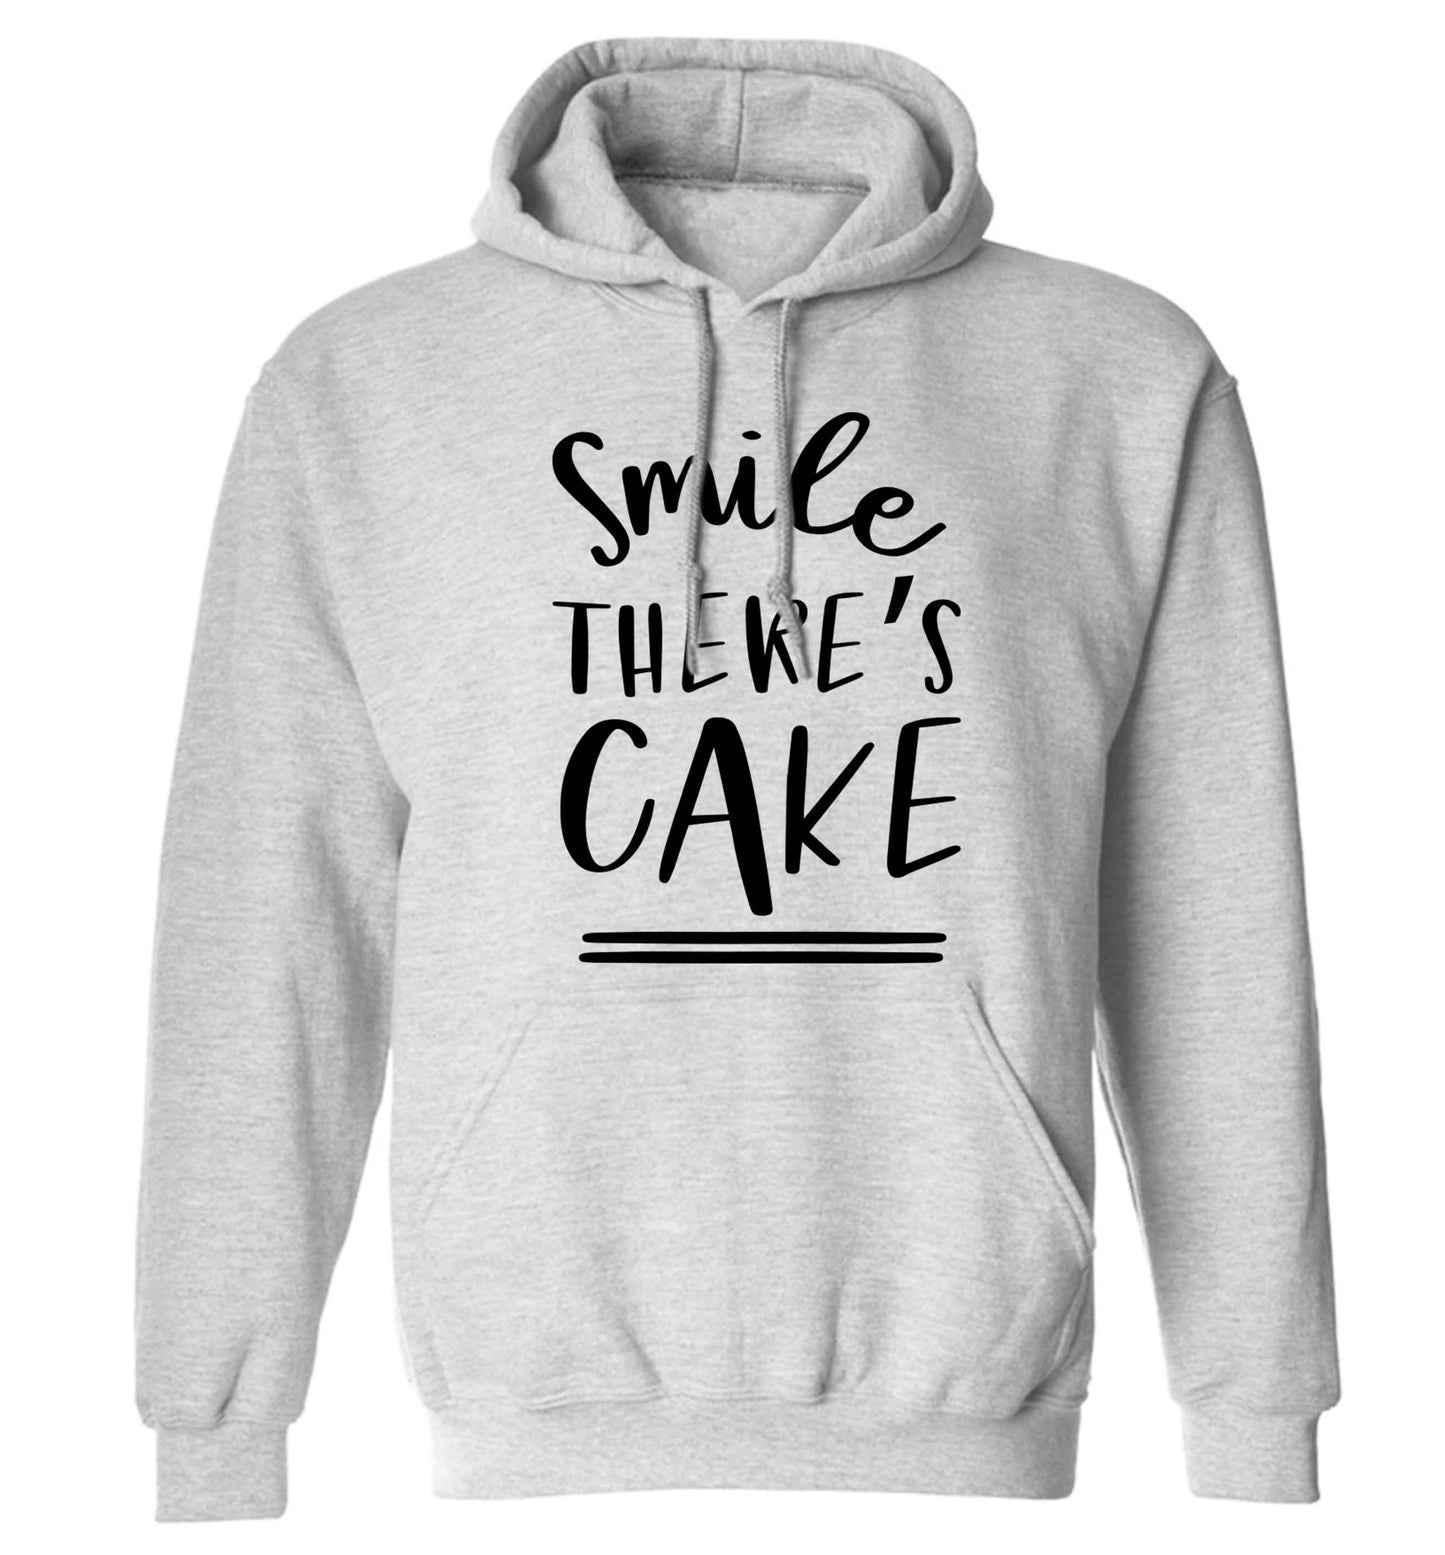 Smile there's cake adults unisex grey hoodie 2XL